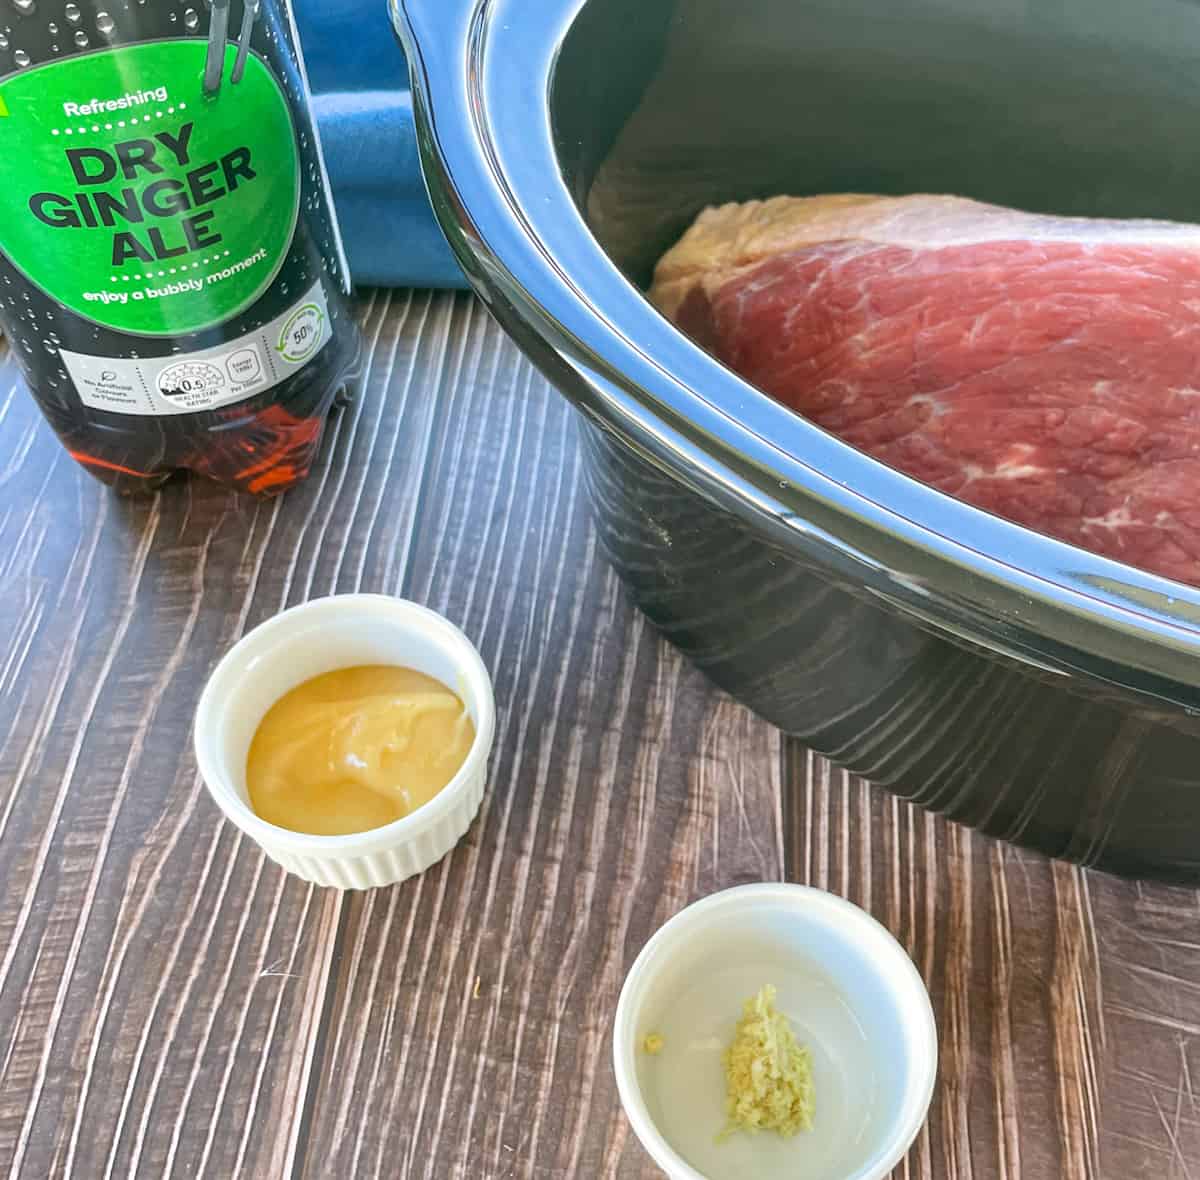 Ingredients used to make ginger ale slow cooked corned beef silverside see recipe card 